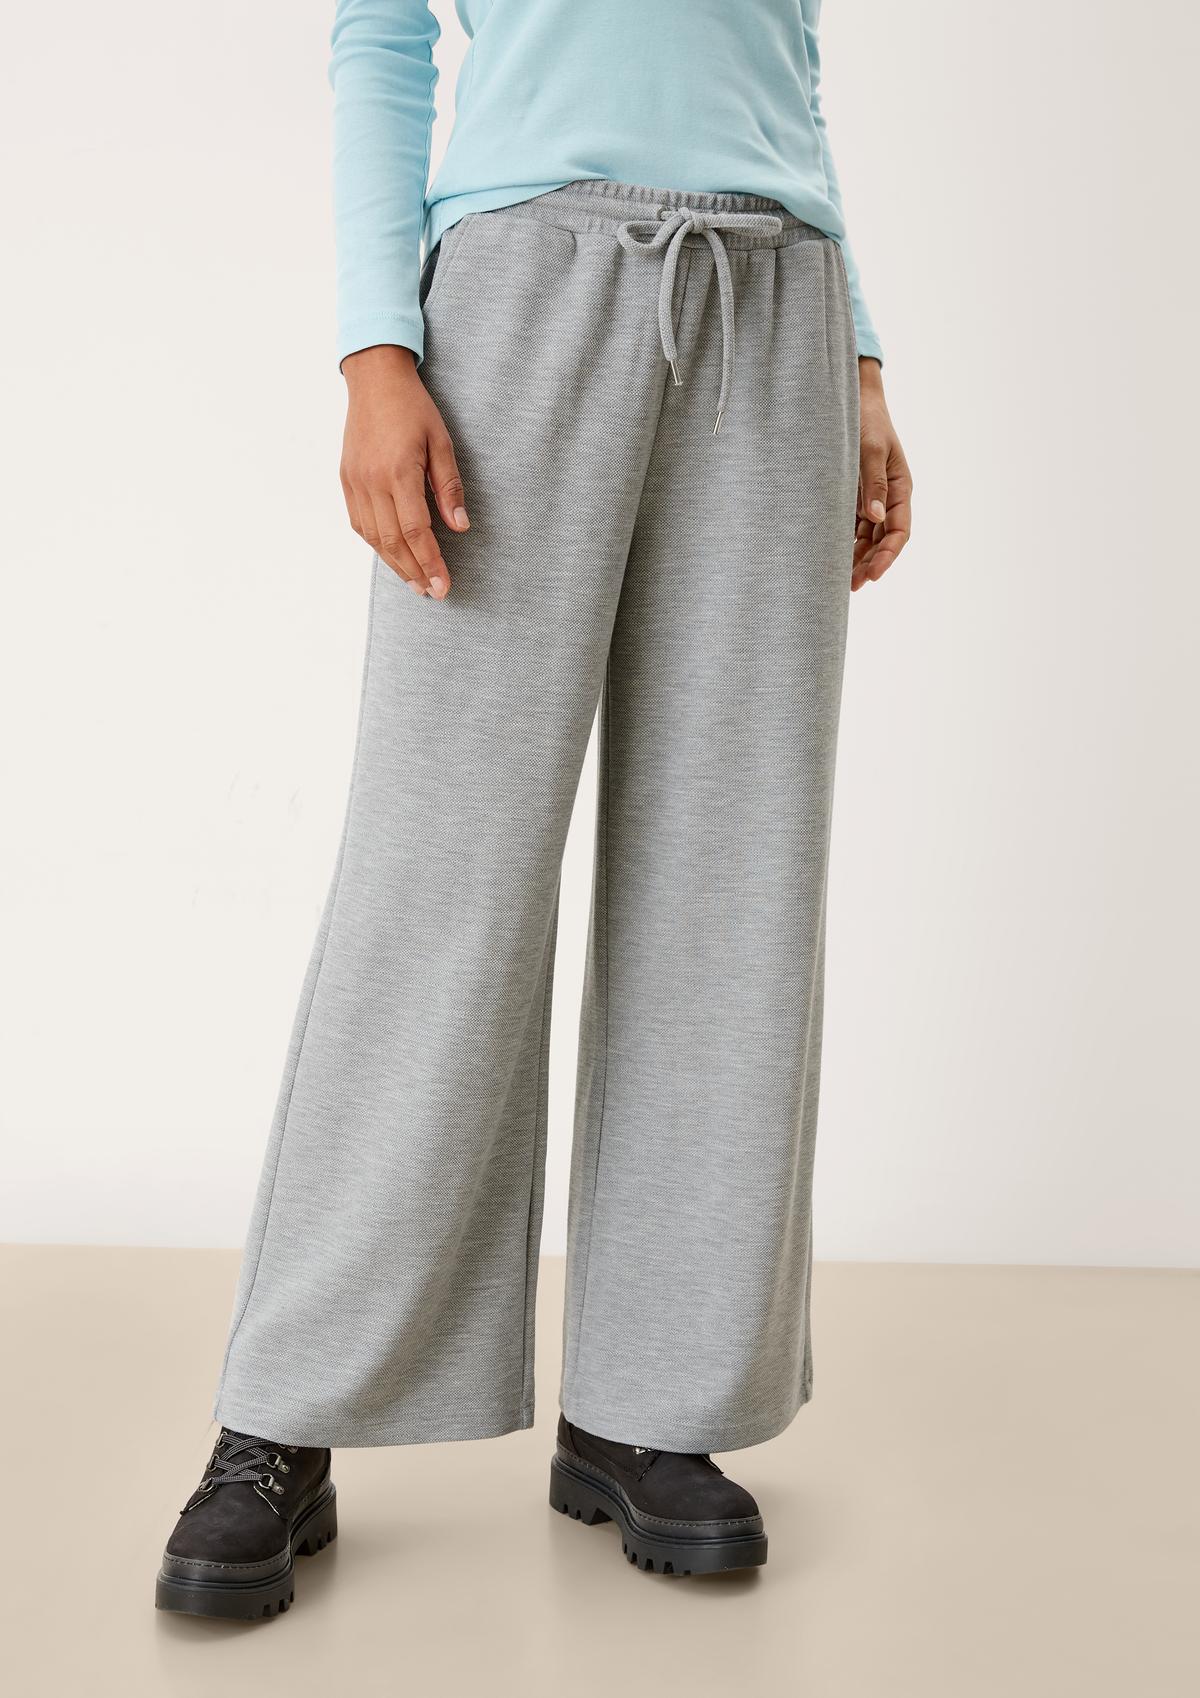 Textured tracksuit bottoms